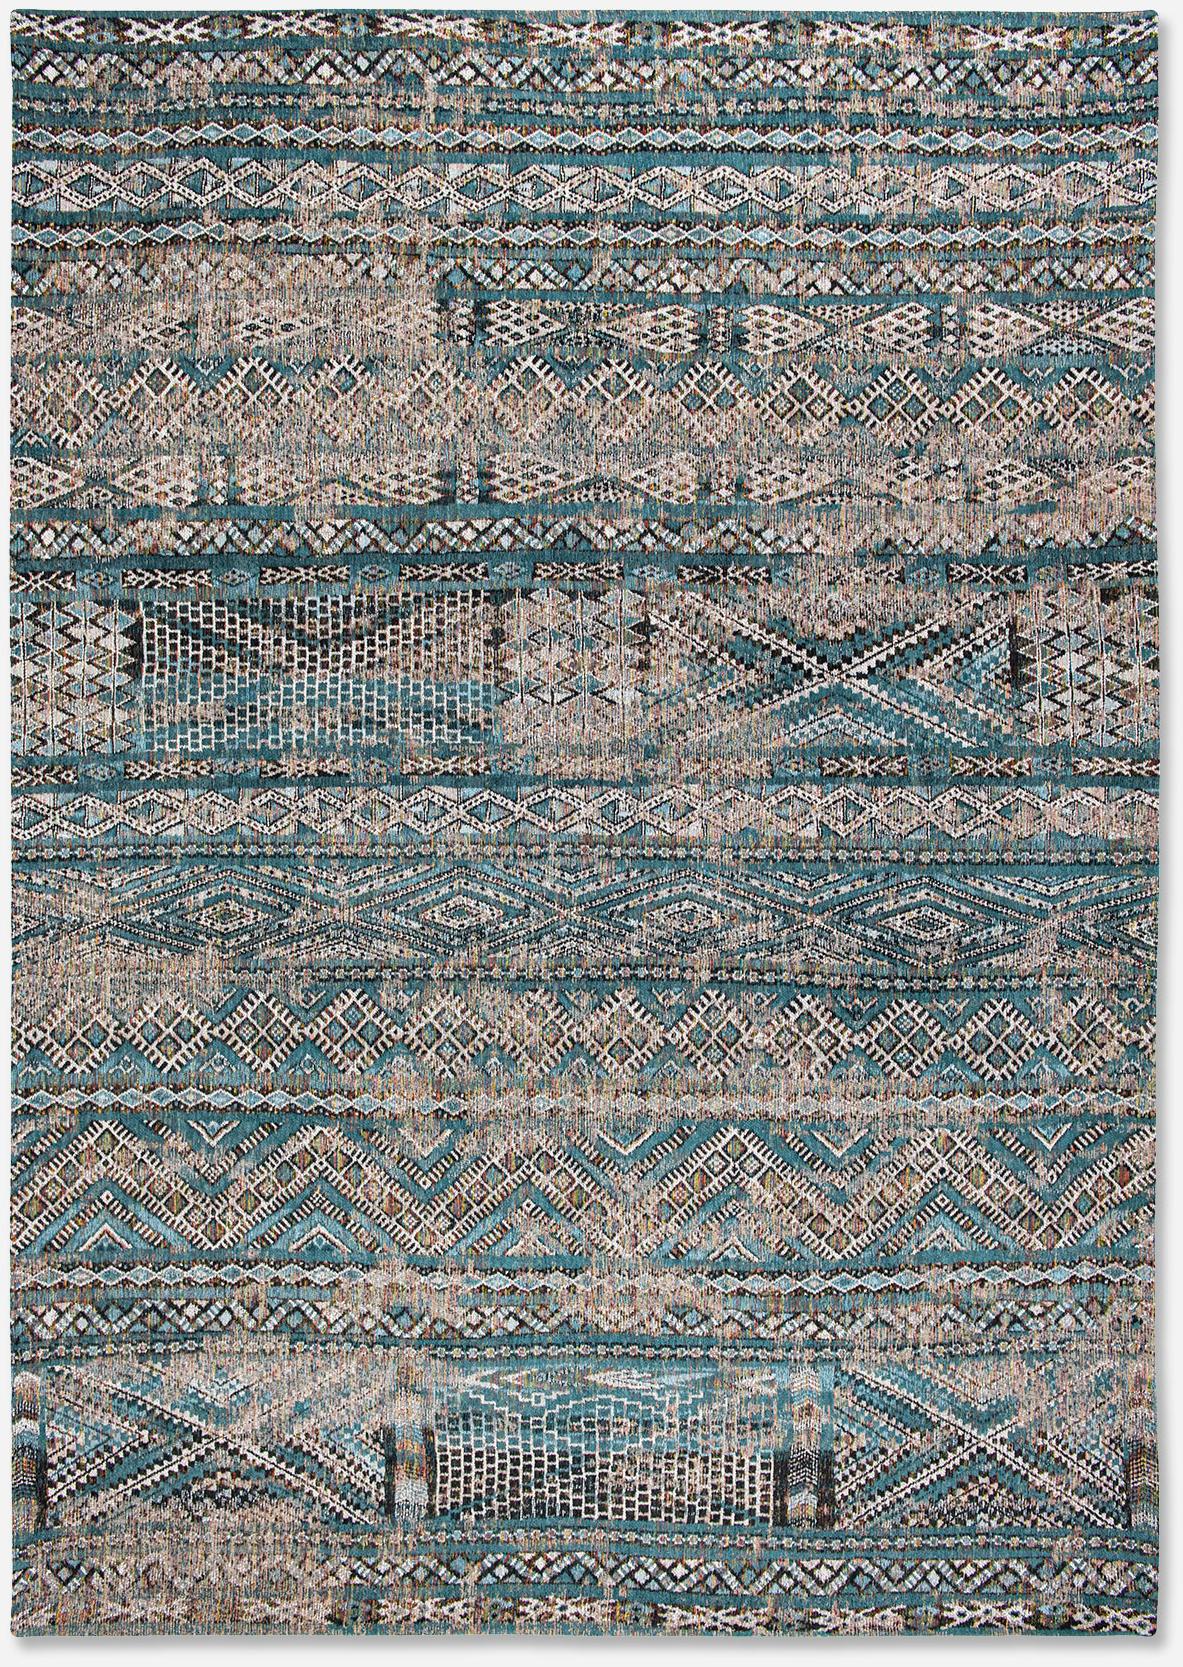 Antiquarian Flatwoven Rug ☞ Size: 6' 7" x 9' 2" (200 x 280 cm)